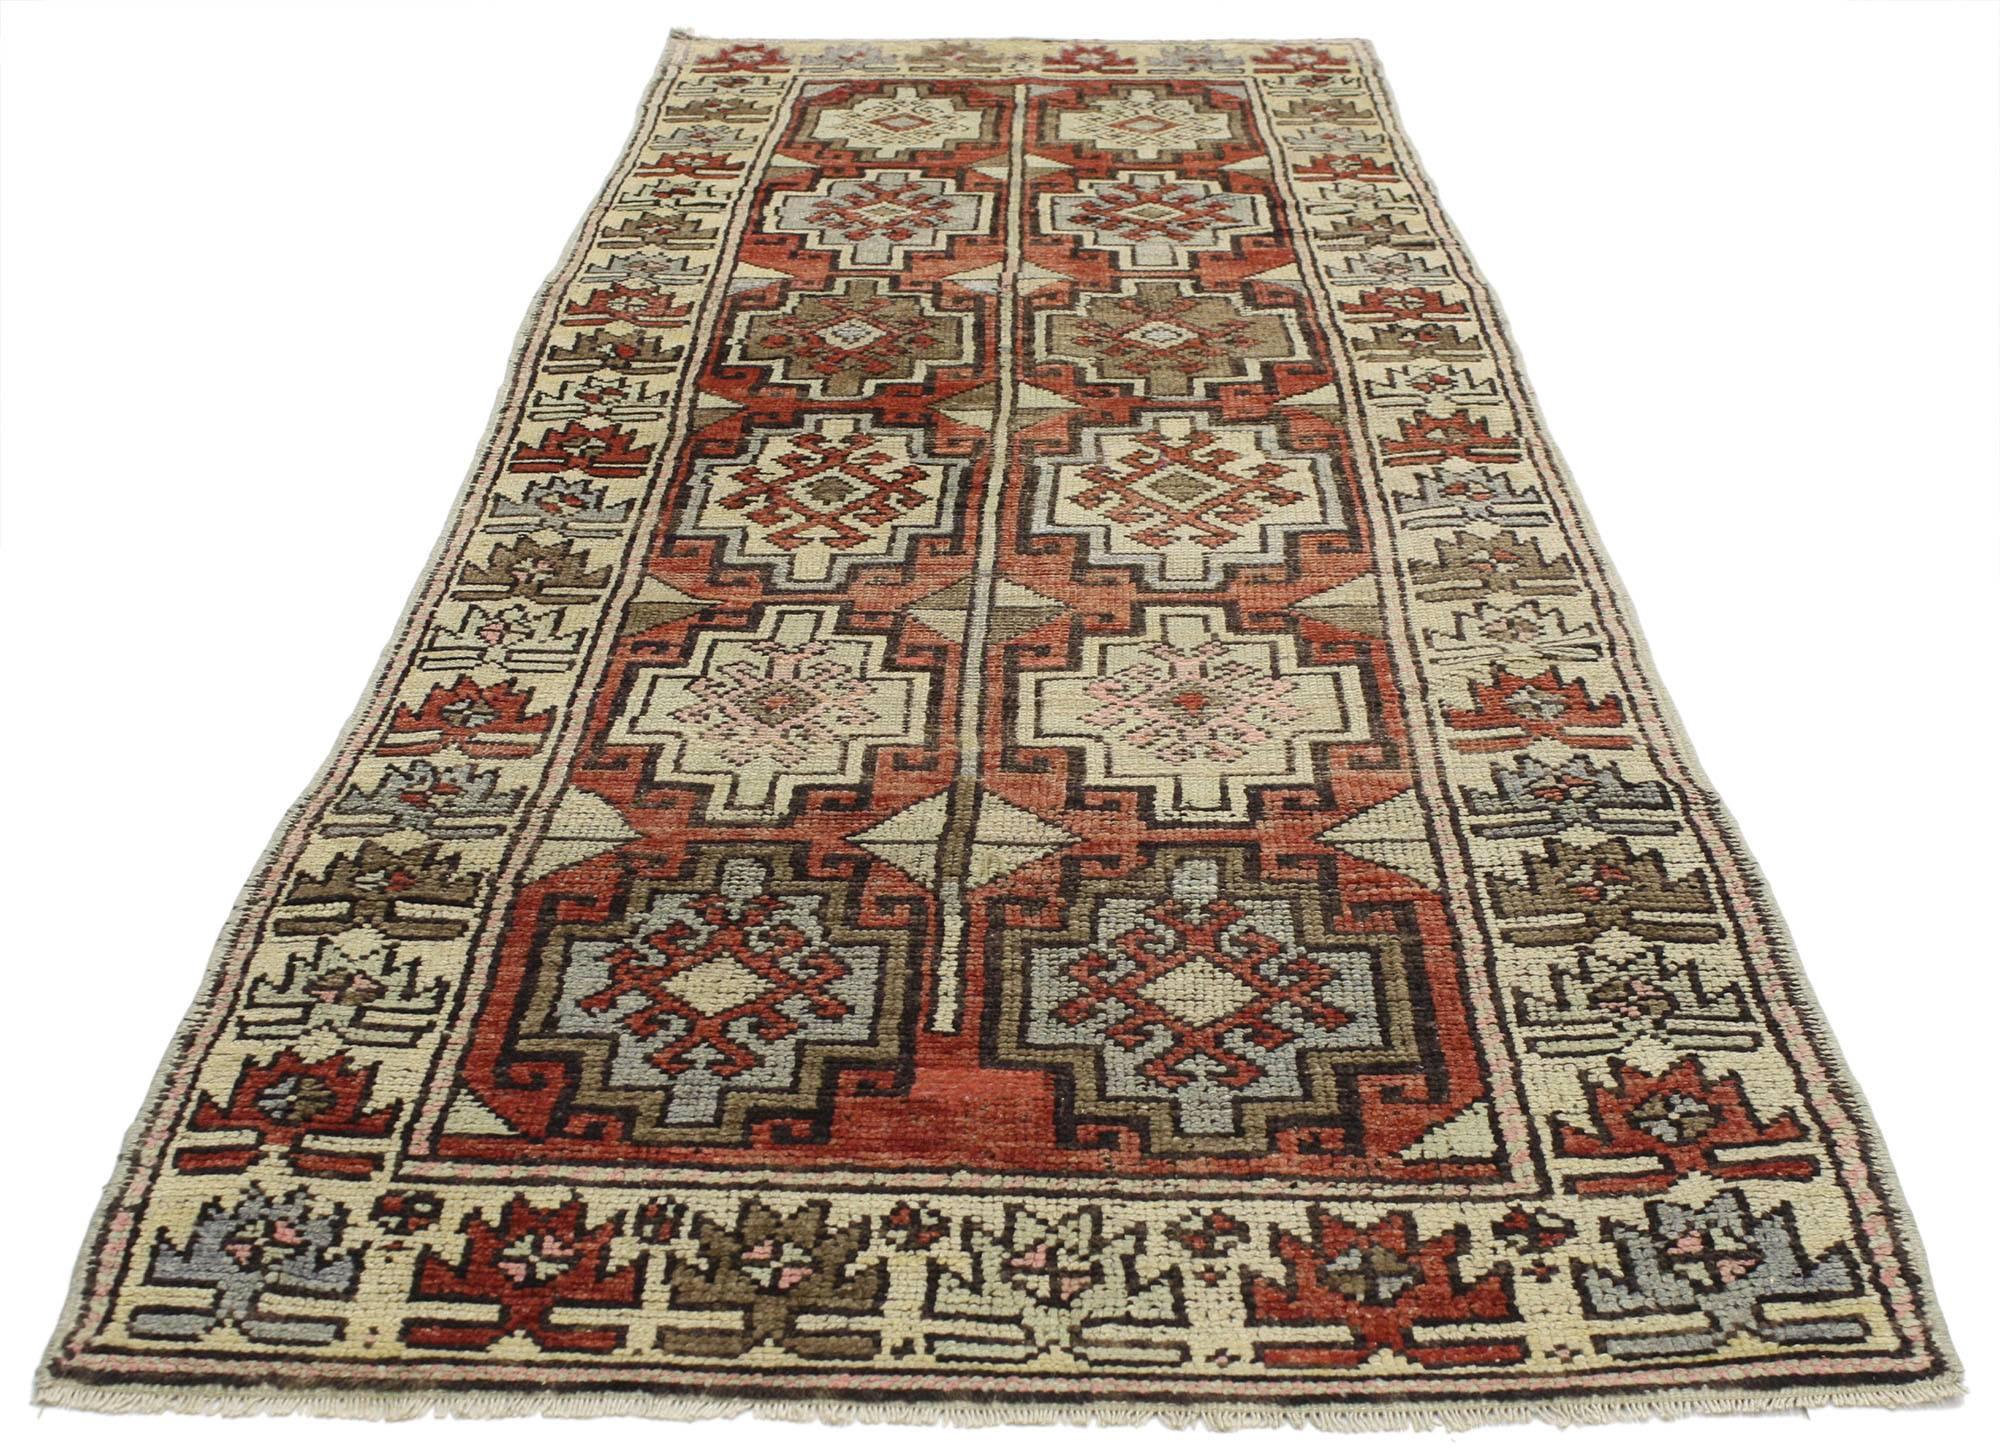 52255, vintage Turkish Oushak runner with traditional style. This hand-knotted wool vintage Turkish Oushak runner features two columns of six stair-step amulet medallions with latch-hook edges, enclosed in each medallion is a dragon motif for